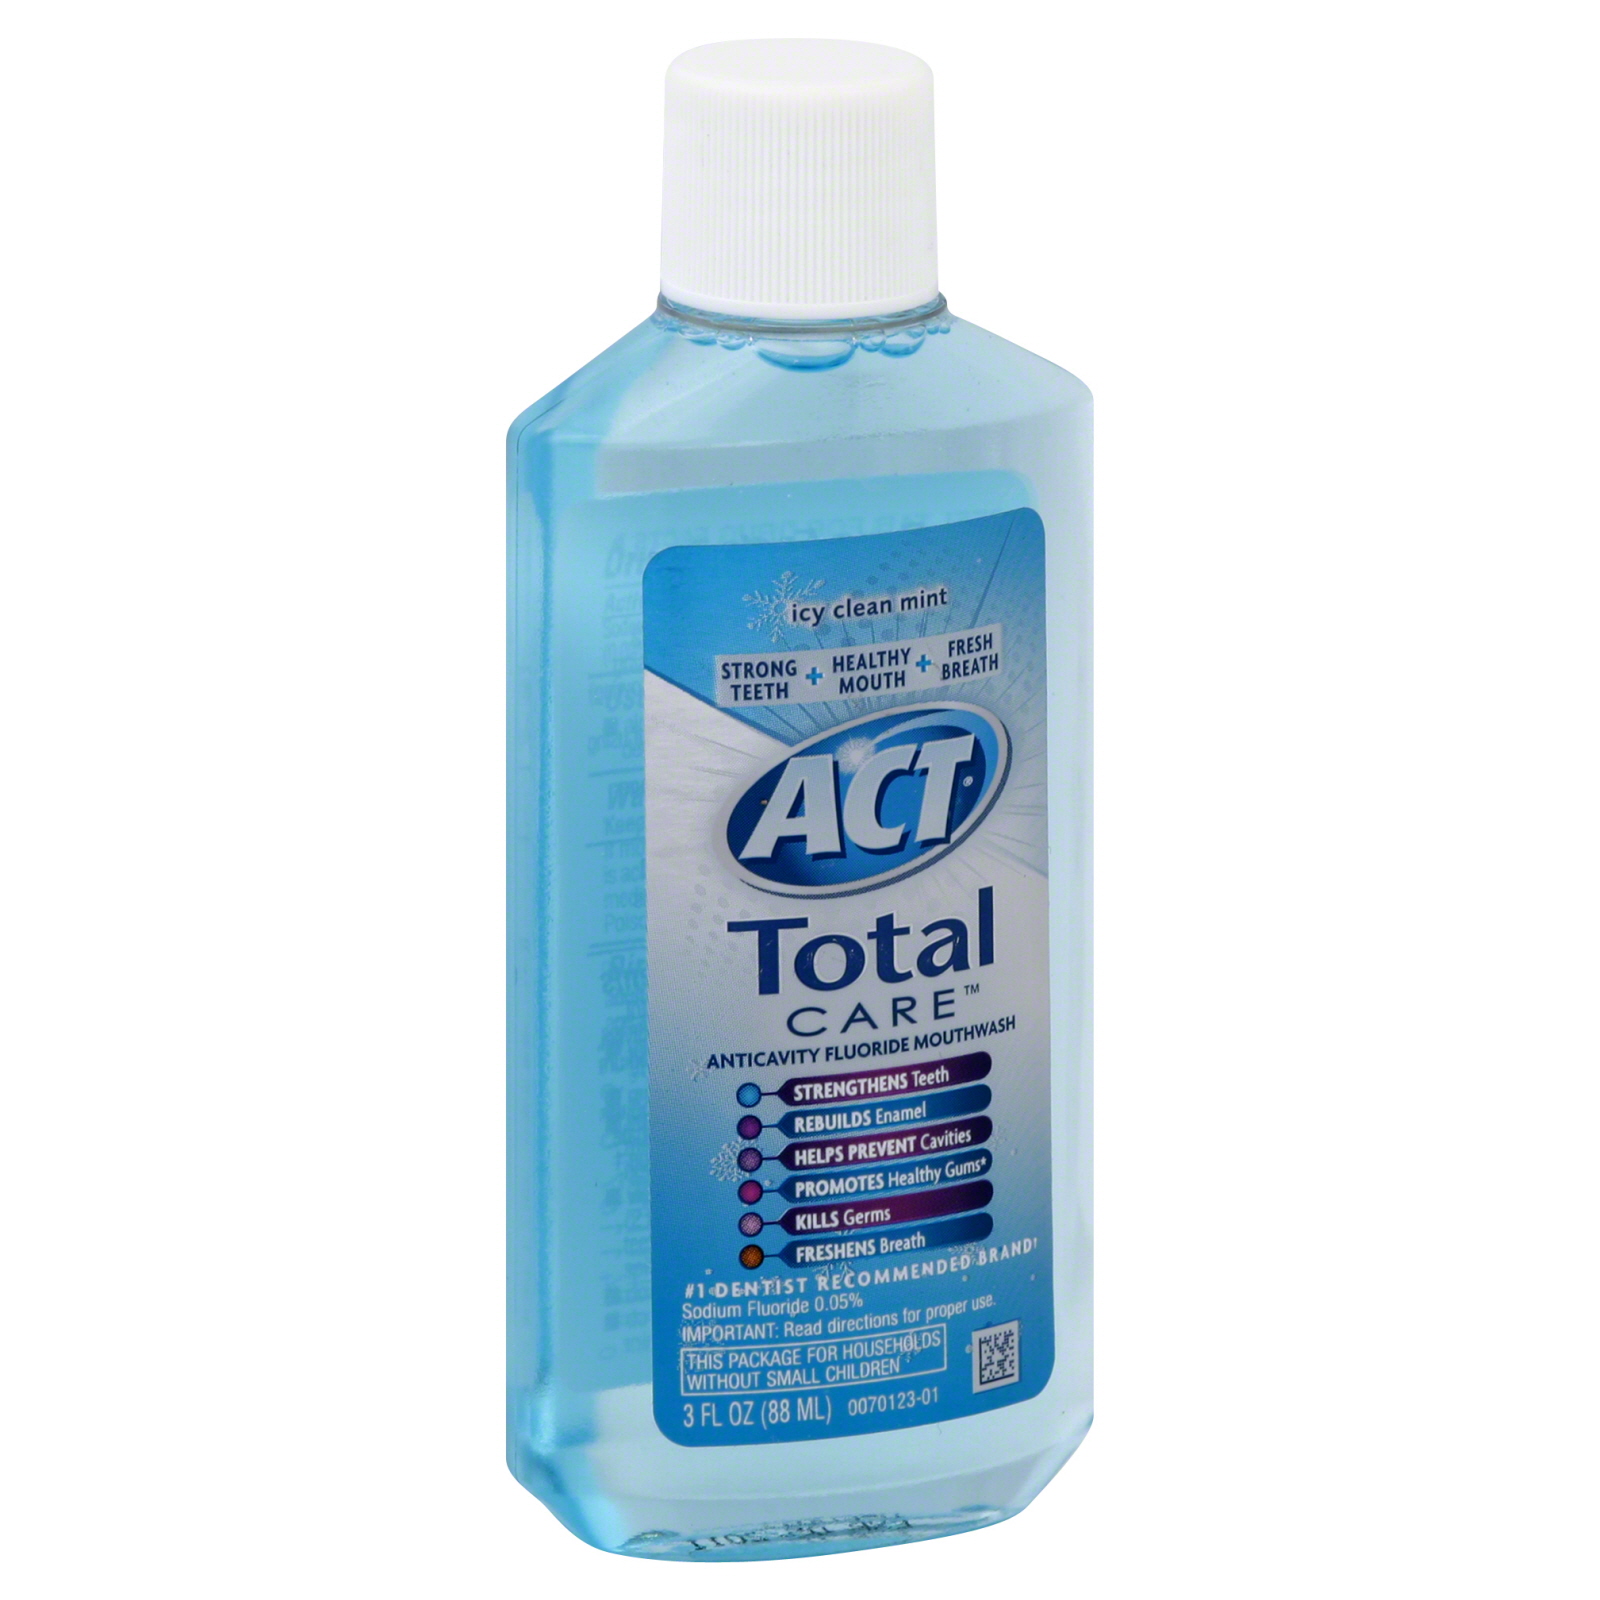 Act Total Care Mouthwash, Anticavity Fluoride, Icy Clean Mint, 3 fl oz (88 ml)